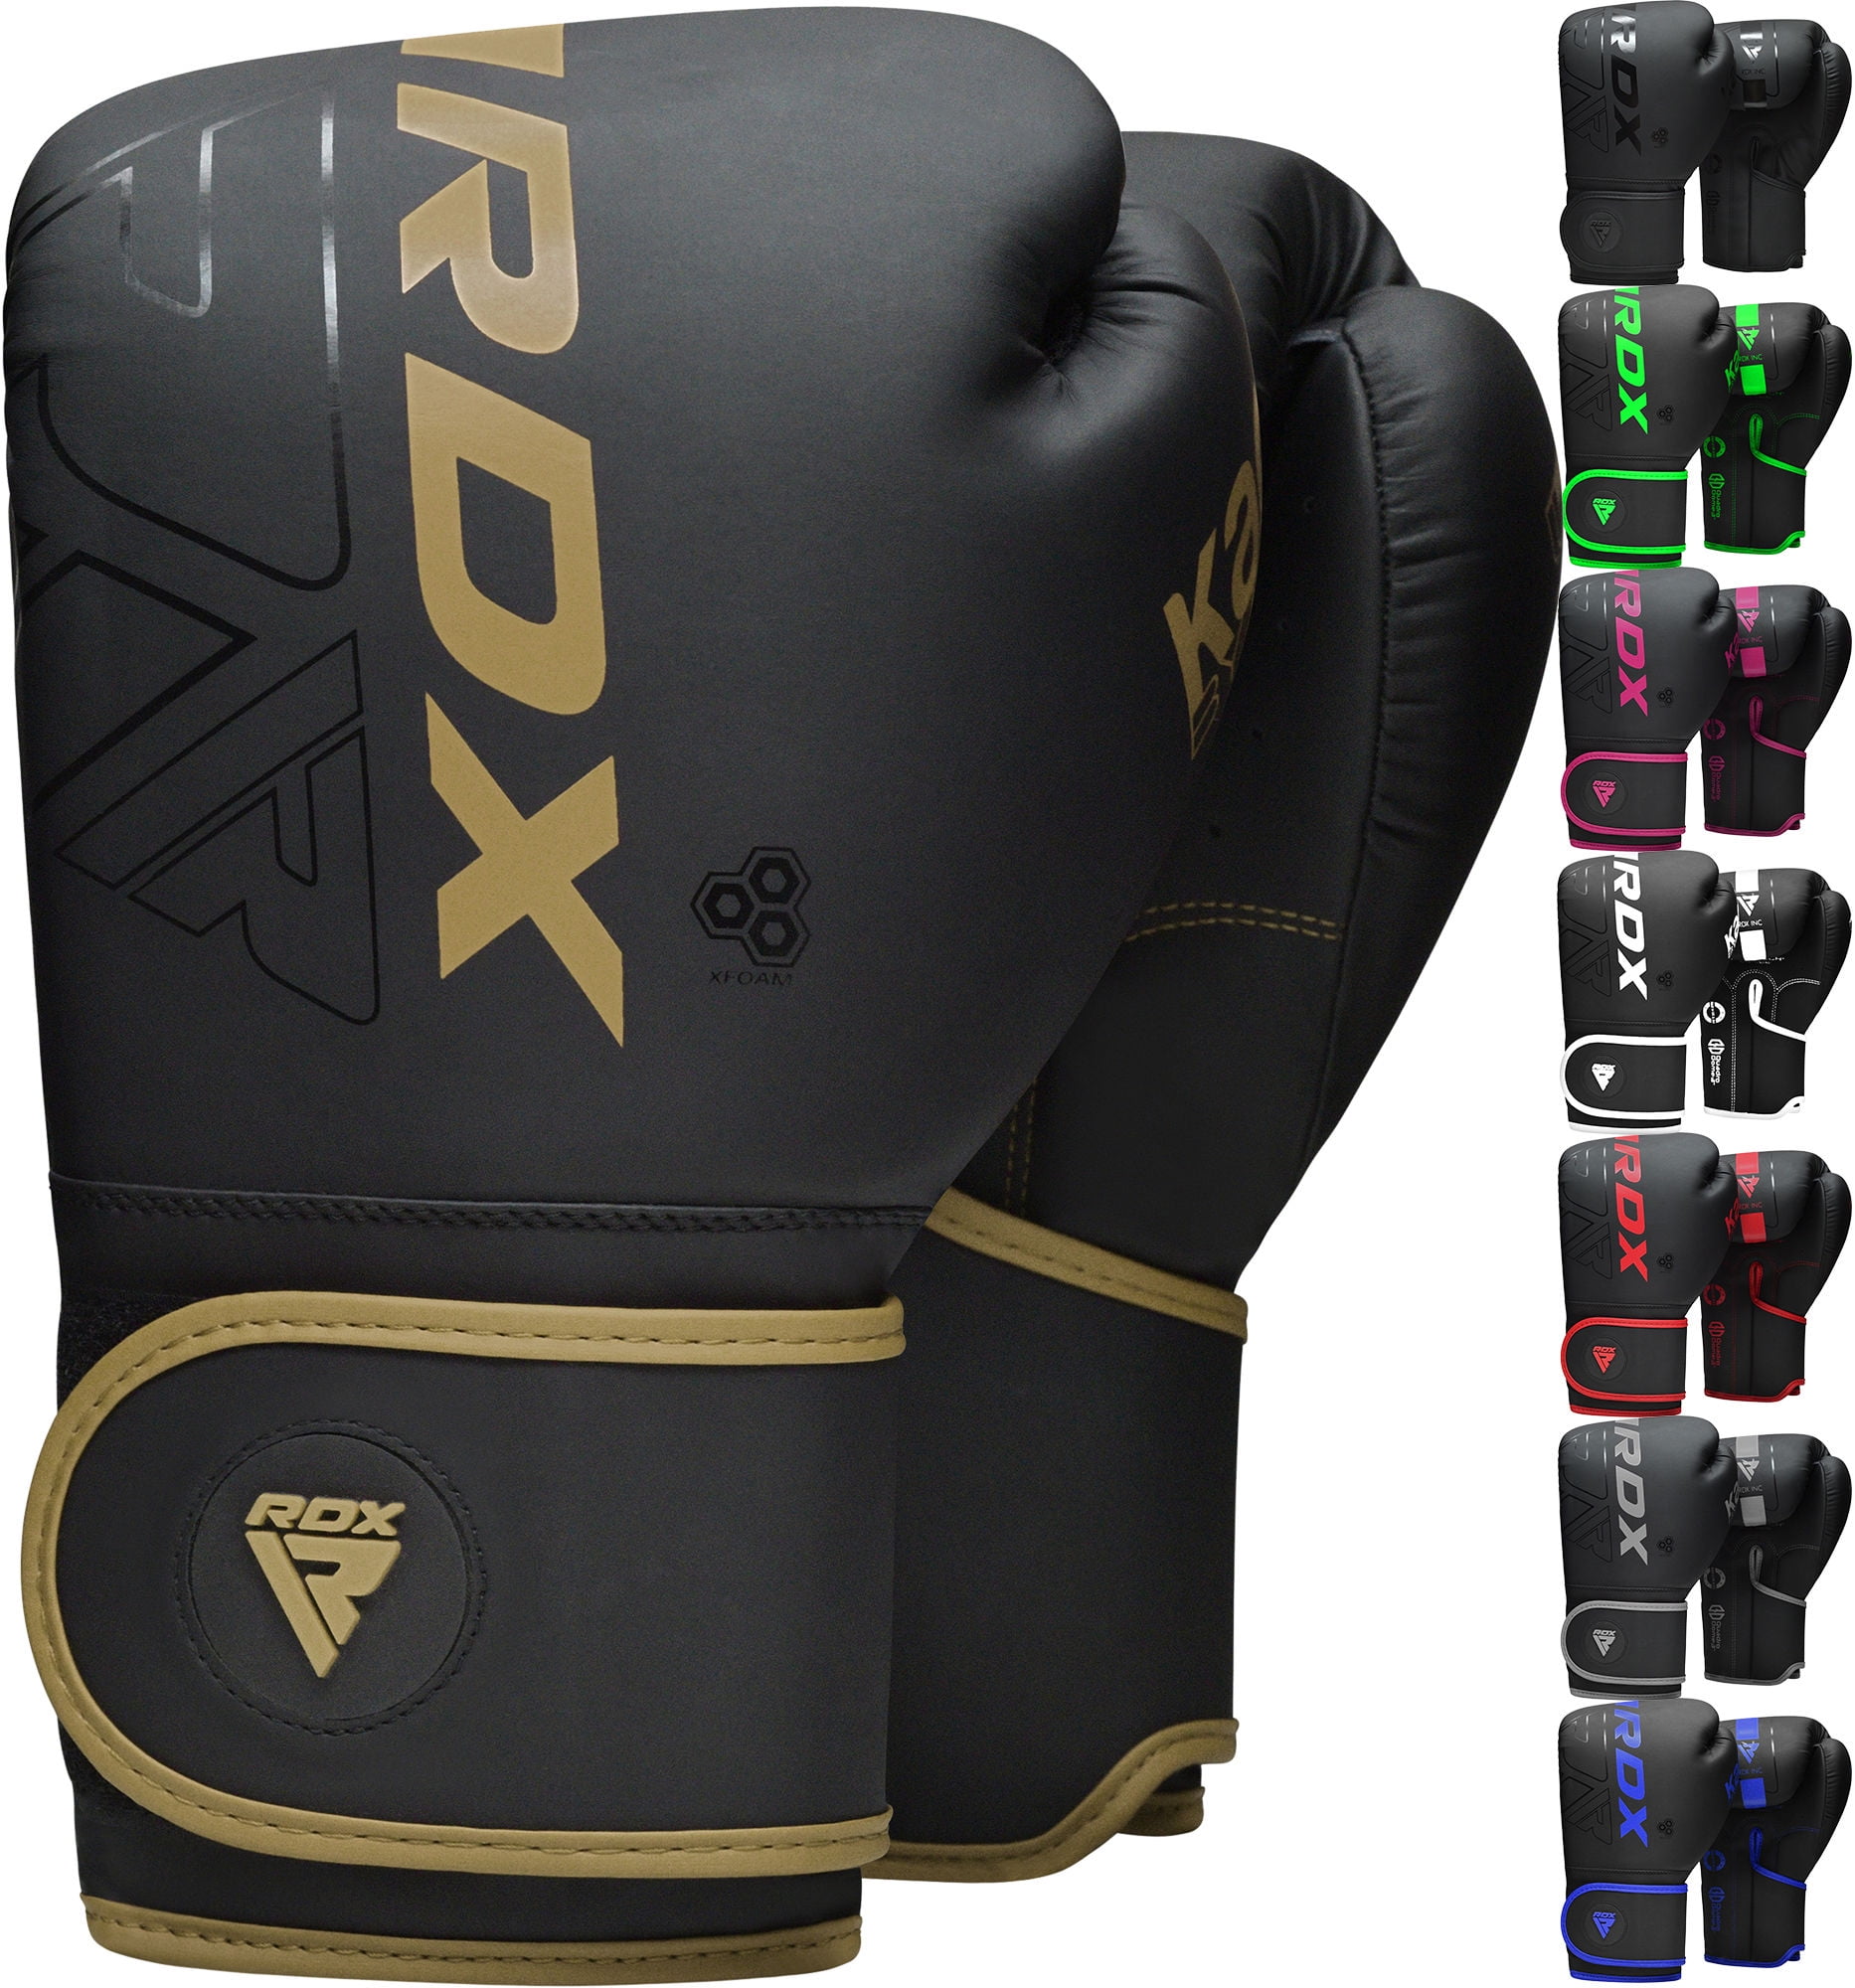 Kids 4 Oz Styles Faux Leather Boxing Gloves SPARRING YOUTH PRACTICE TRAINING MMA 